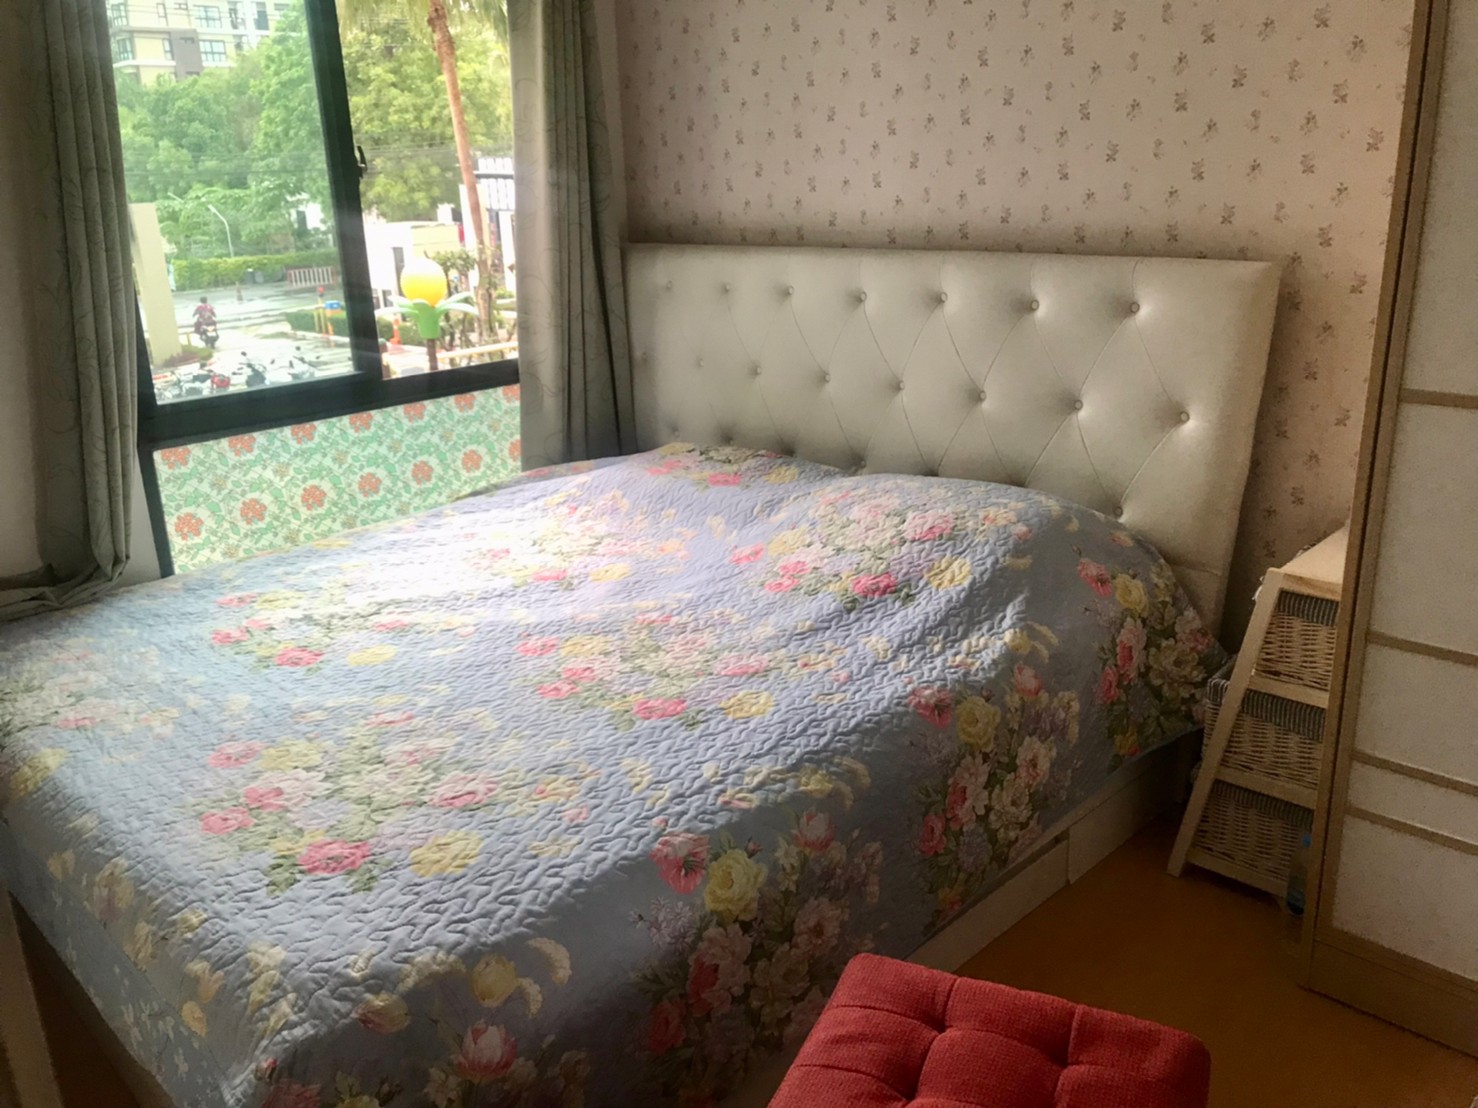 Condo for sale, wide room, good price !!!! Condo for sale, Icon Do Ngamwongwan 1, corner room, area 48.22 sq.m., good price, near the Ministry of Public Health.